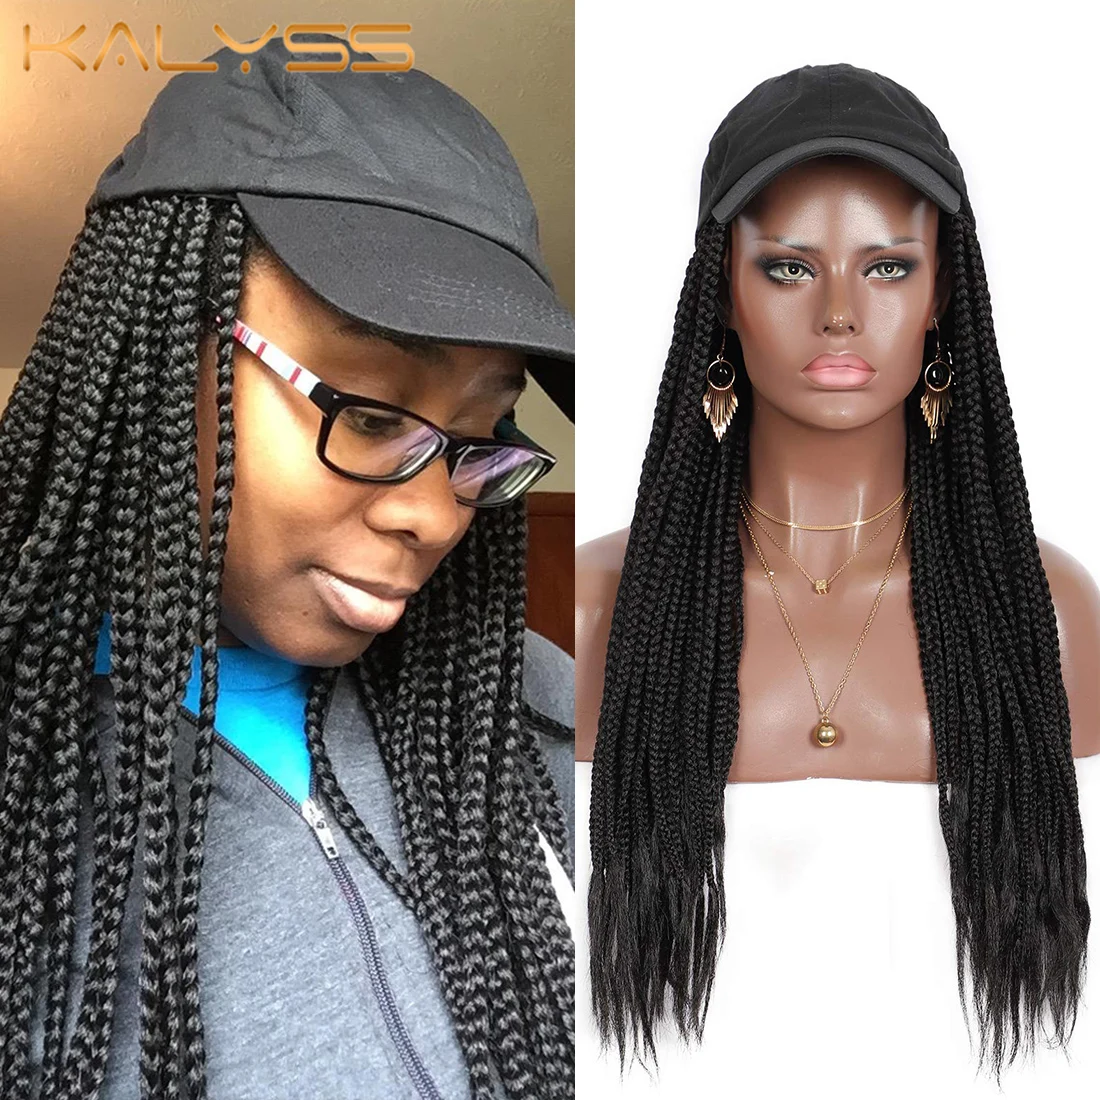 Kalyss 20'' Baseball Cap Braided Box Braids Wigs For Black Women Synthetic Braid Hair Extension with Adjustable Hat